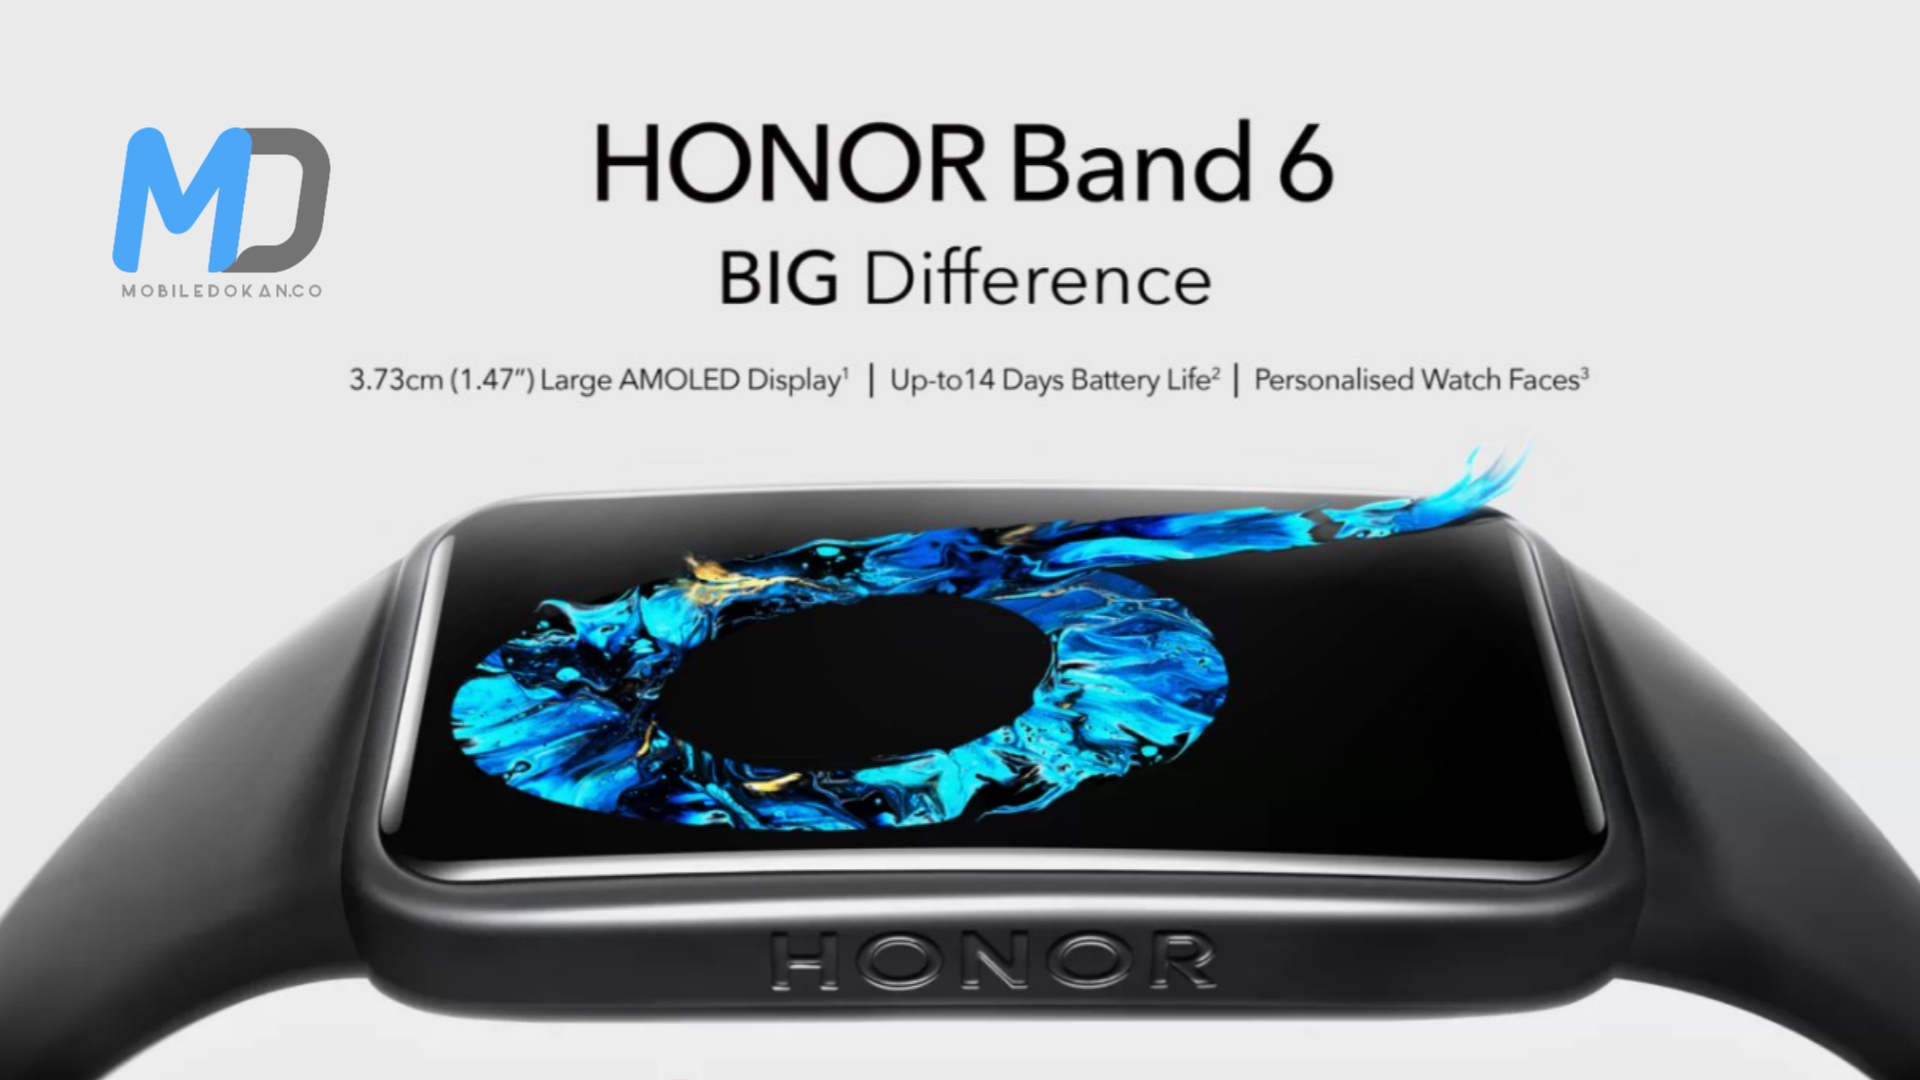 Honor Band 6 launched in India sale for 3,999 INR ($55)